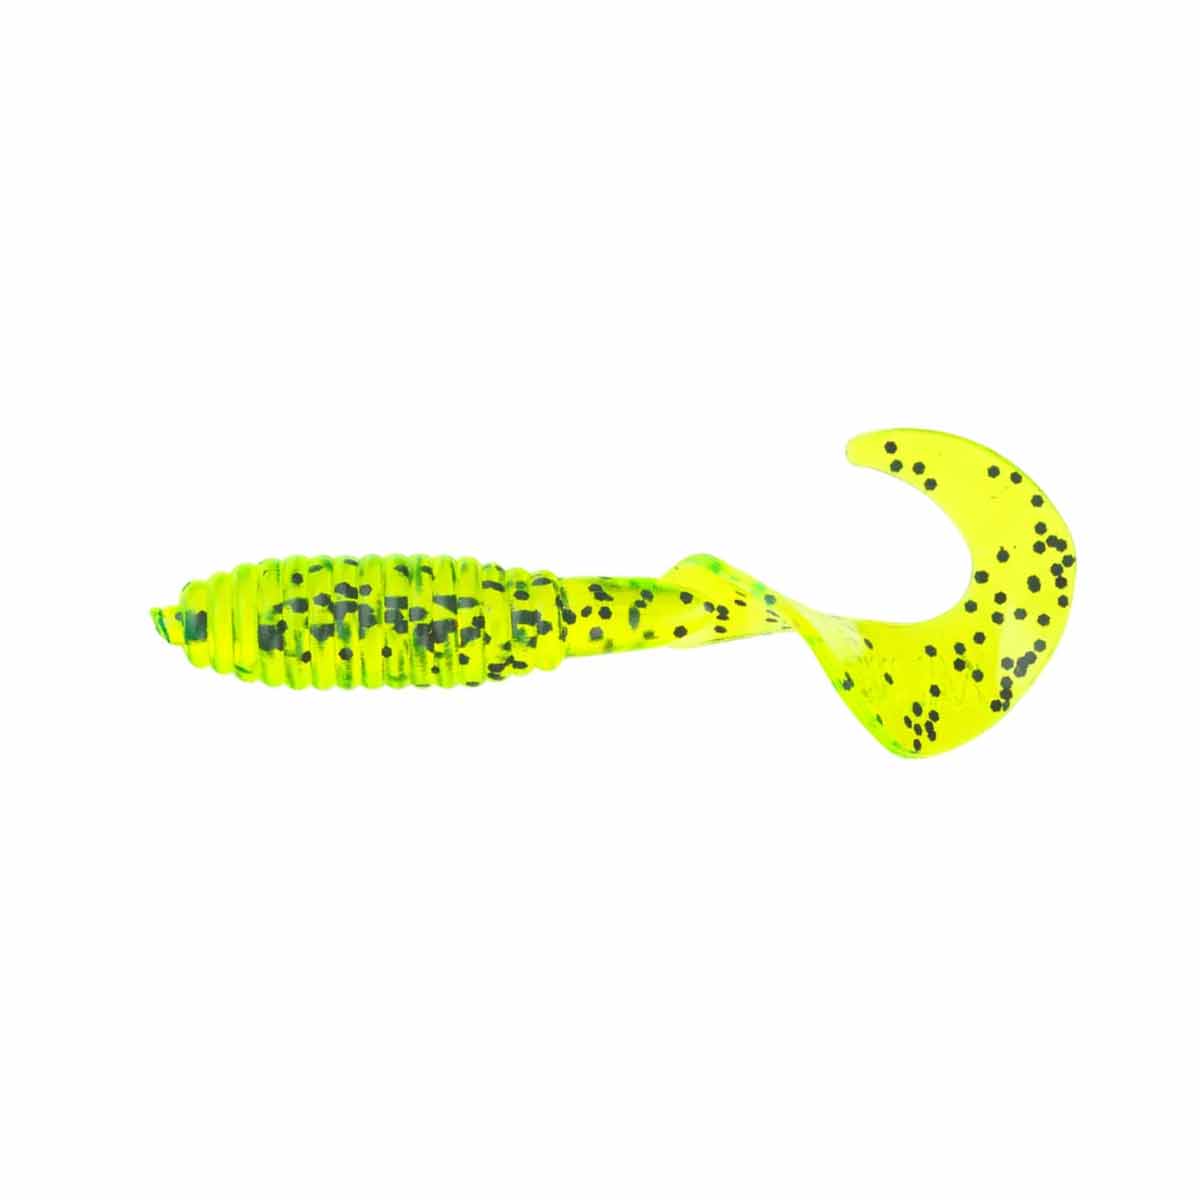 Lunker Grub_Chartreuse S&P